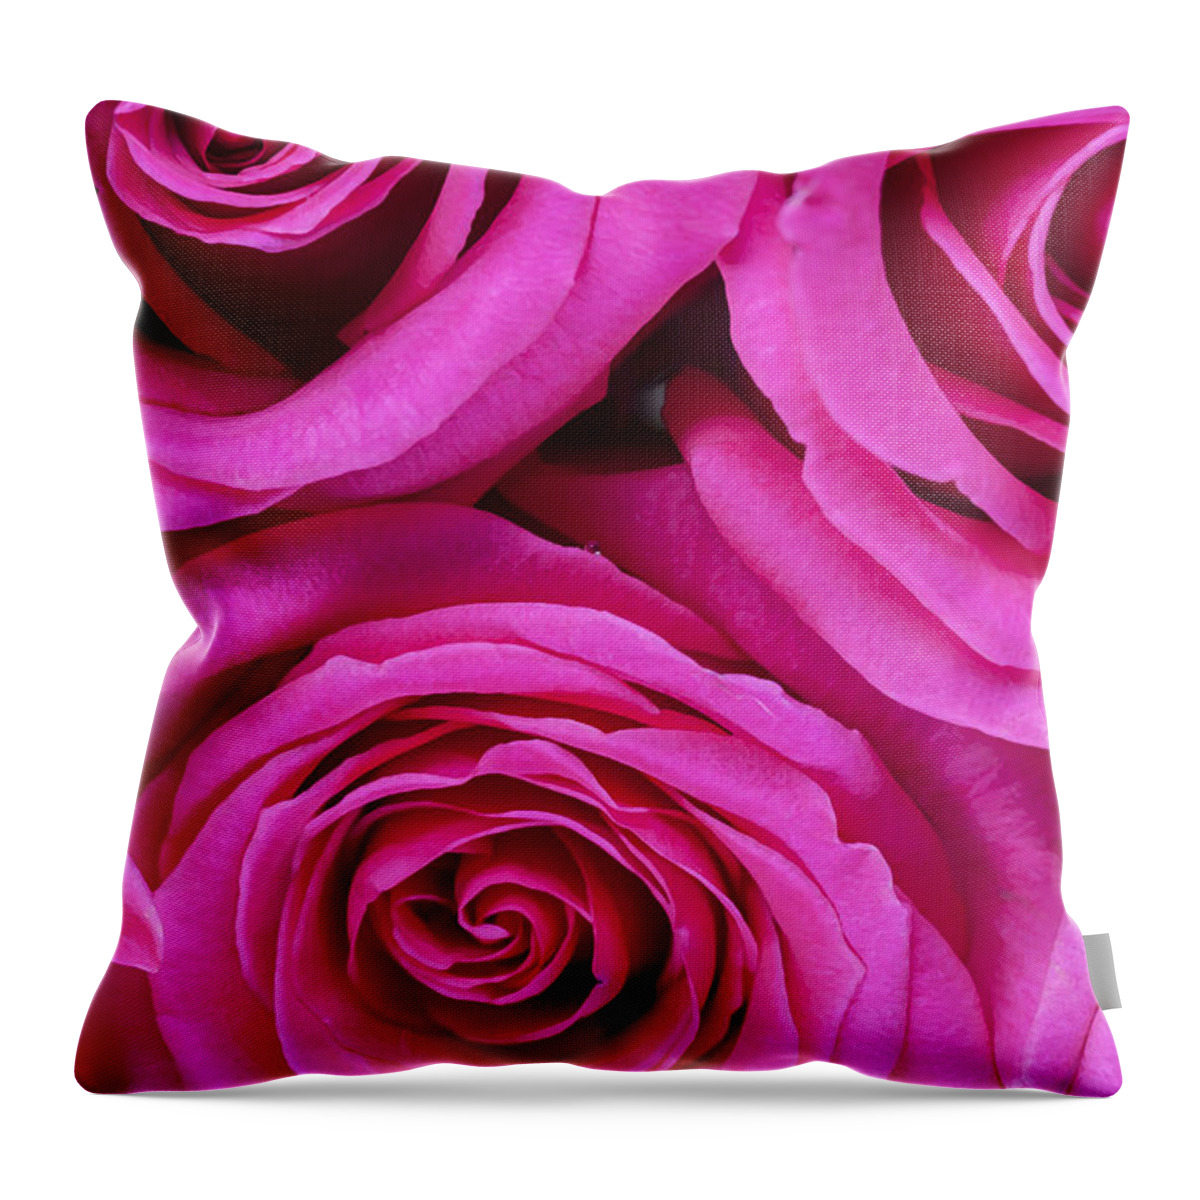 Pink Roses Throw Pillow featuring the photograph Pink Roses 2 by Rich Franco